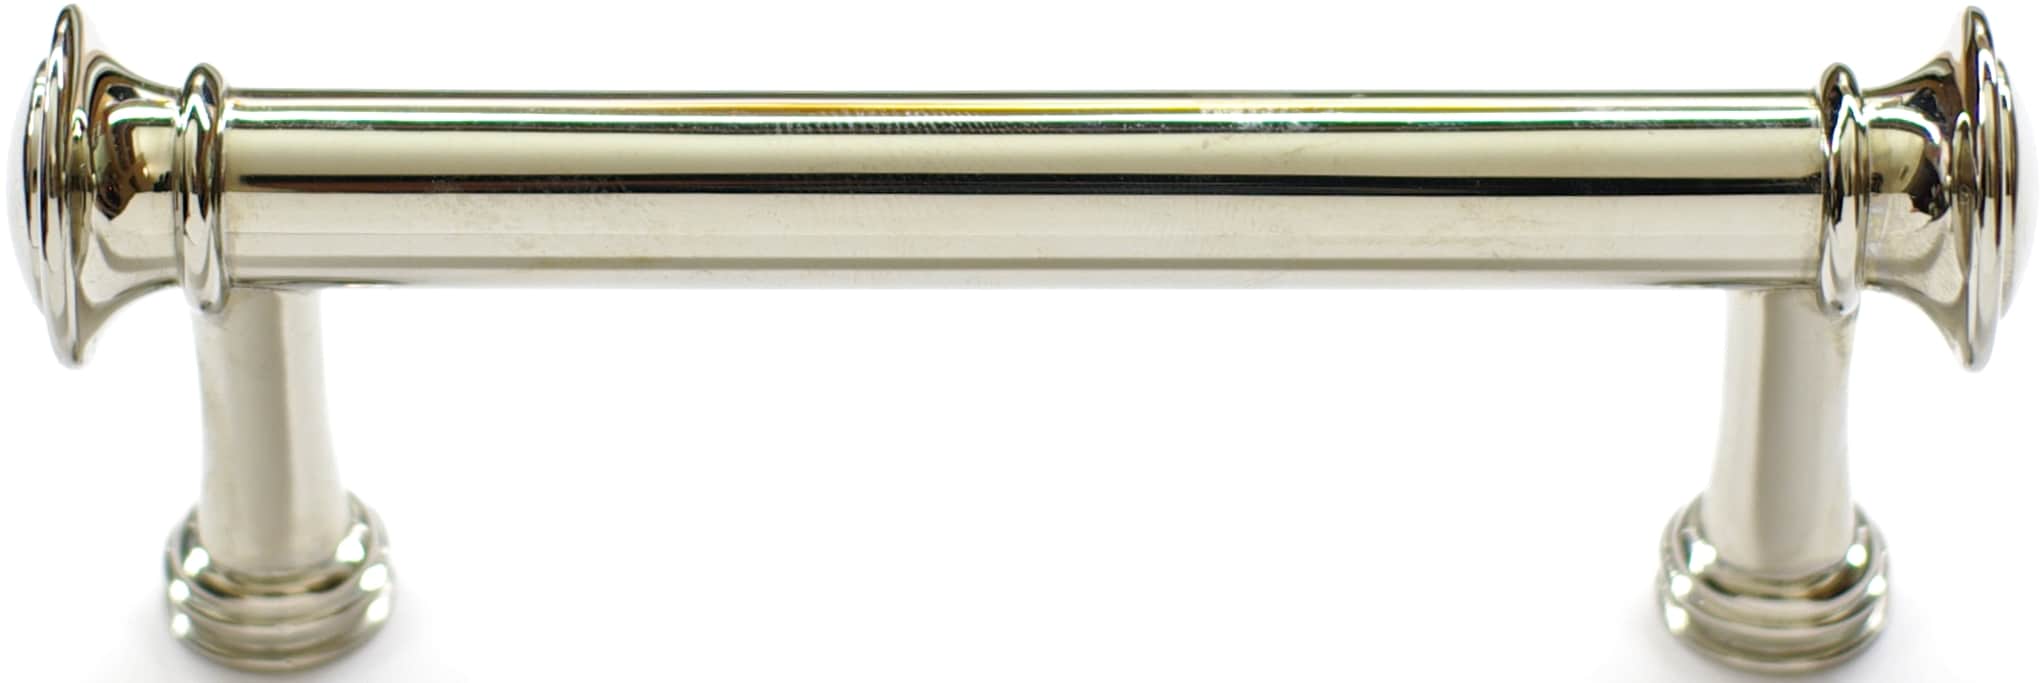 allen + roth Center to Center Polished Nickel Drawer Pulls in the